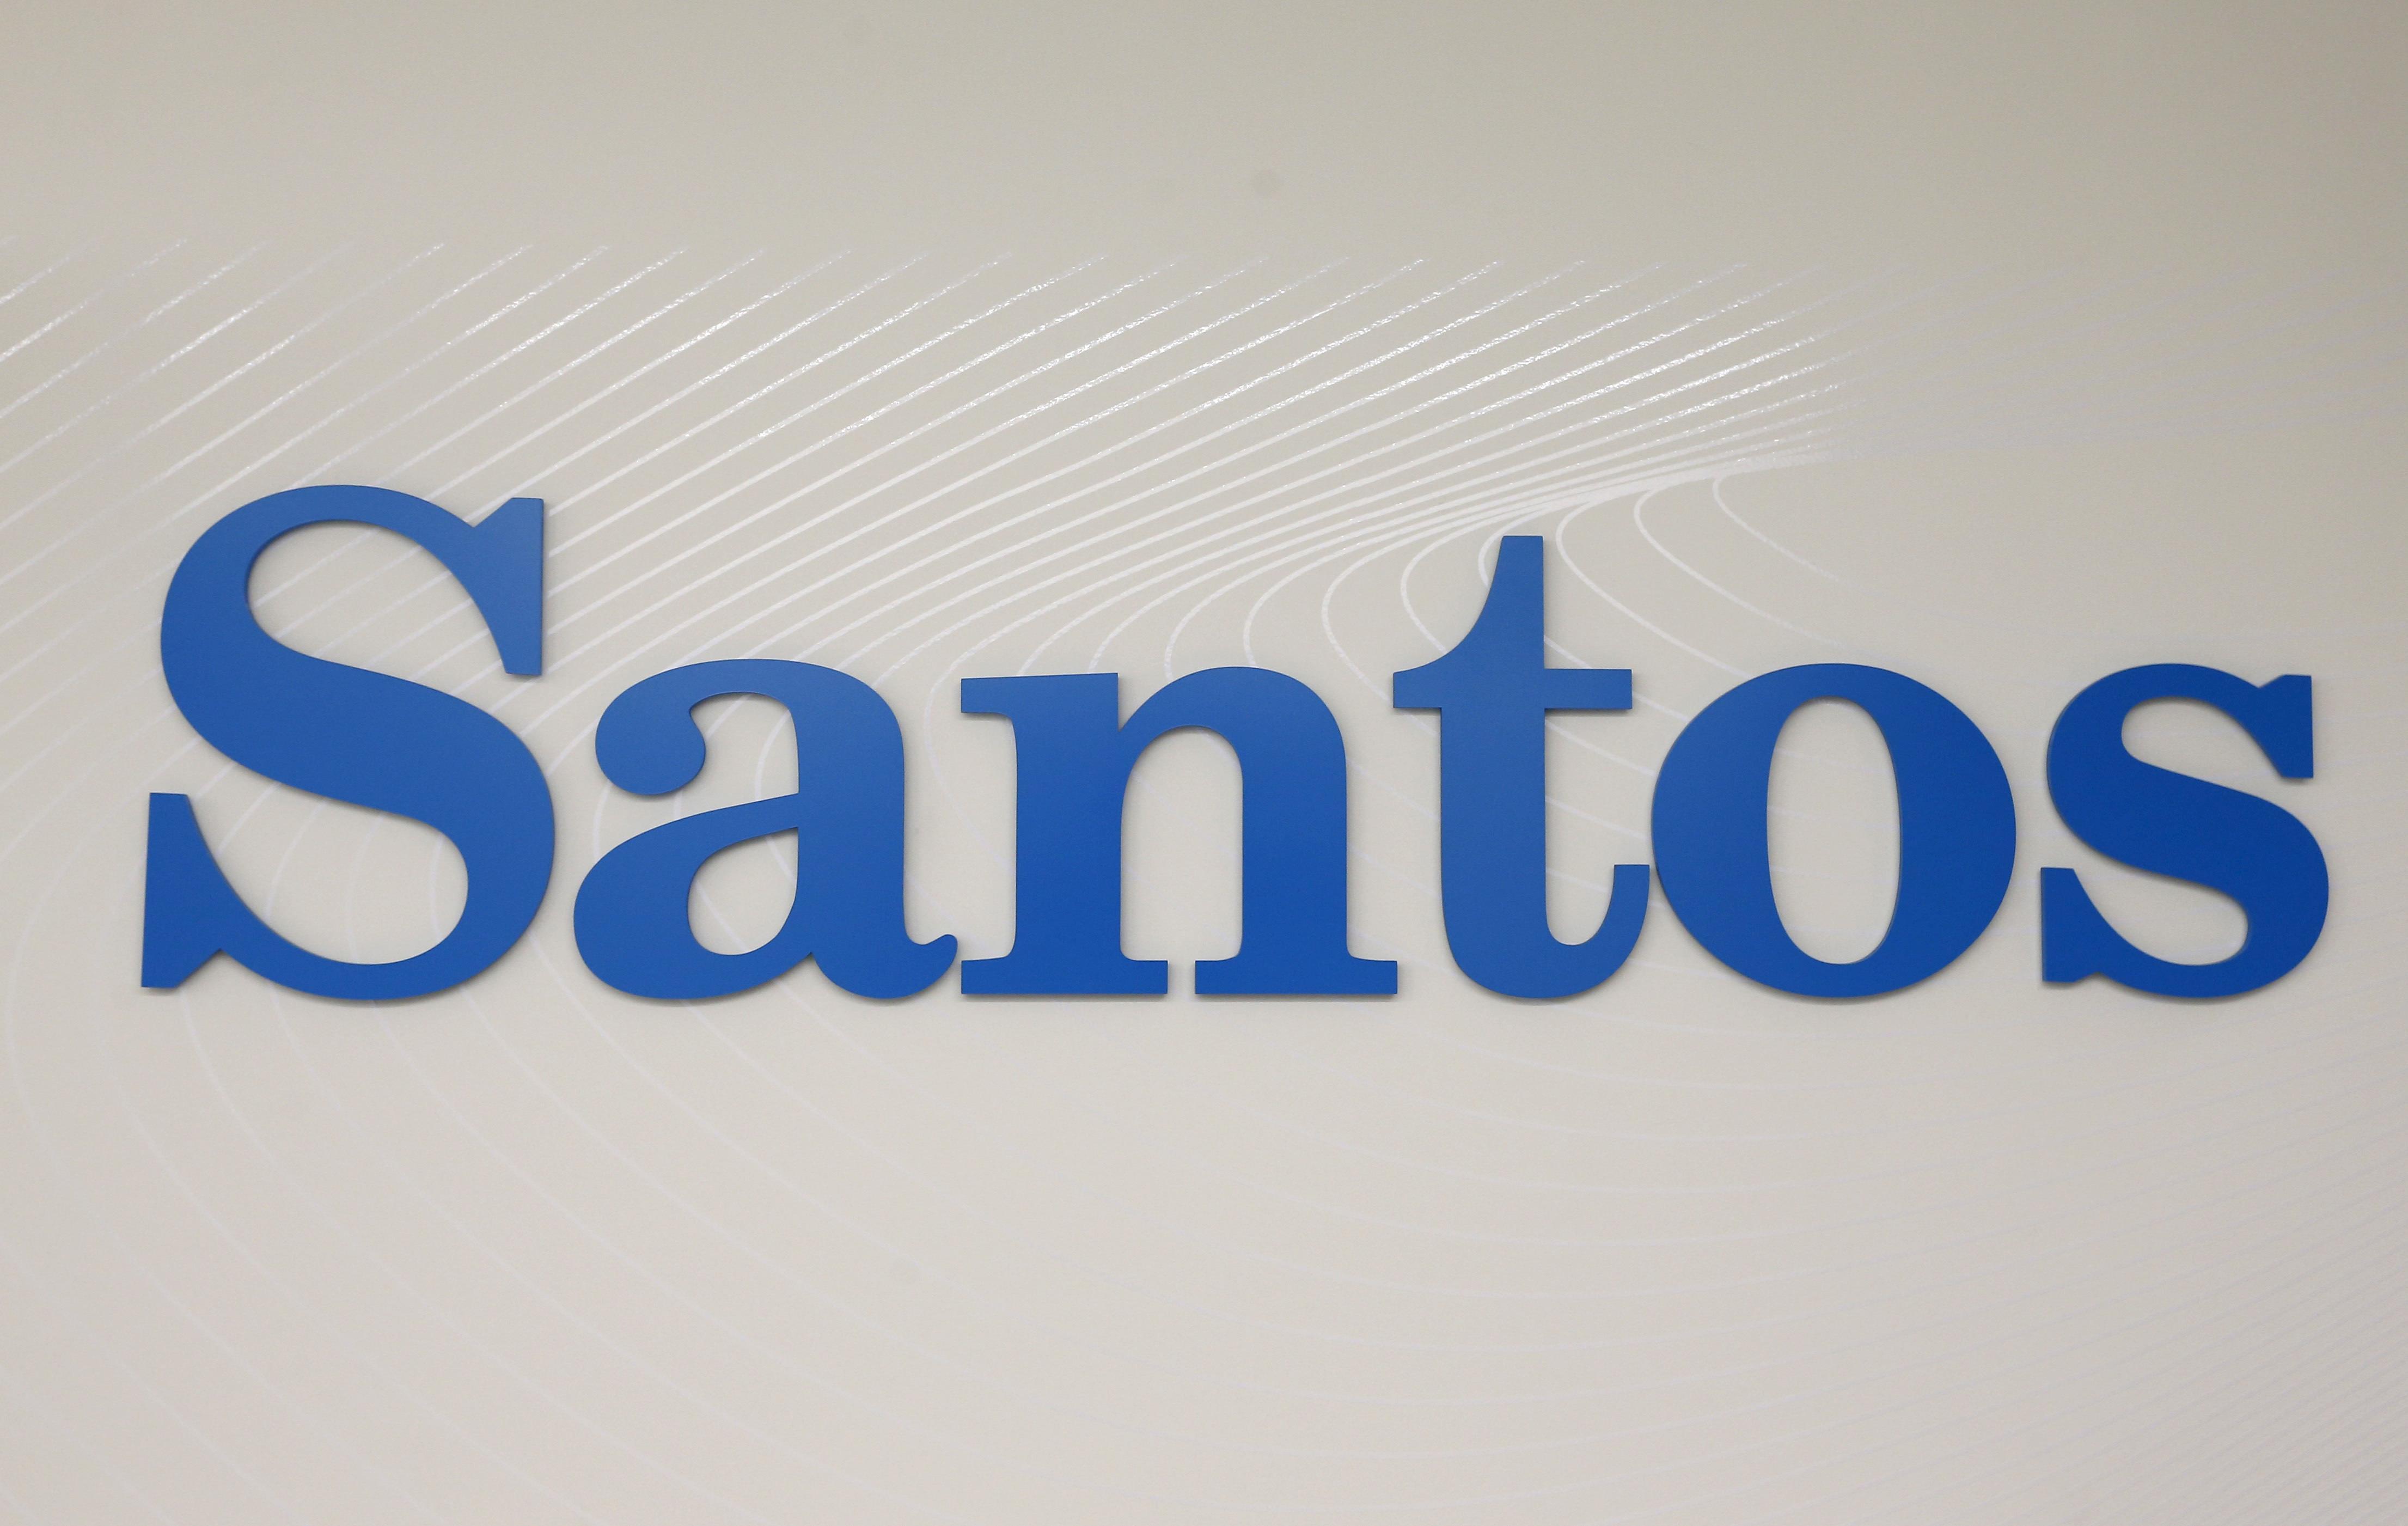 The logo of Australian oil and gas producer Santos Ltd is pictured in Sydney